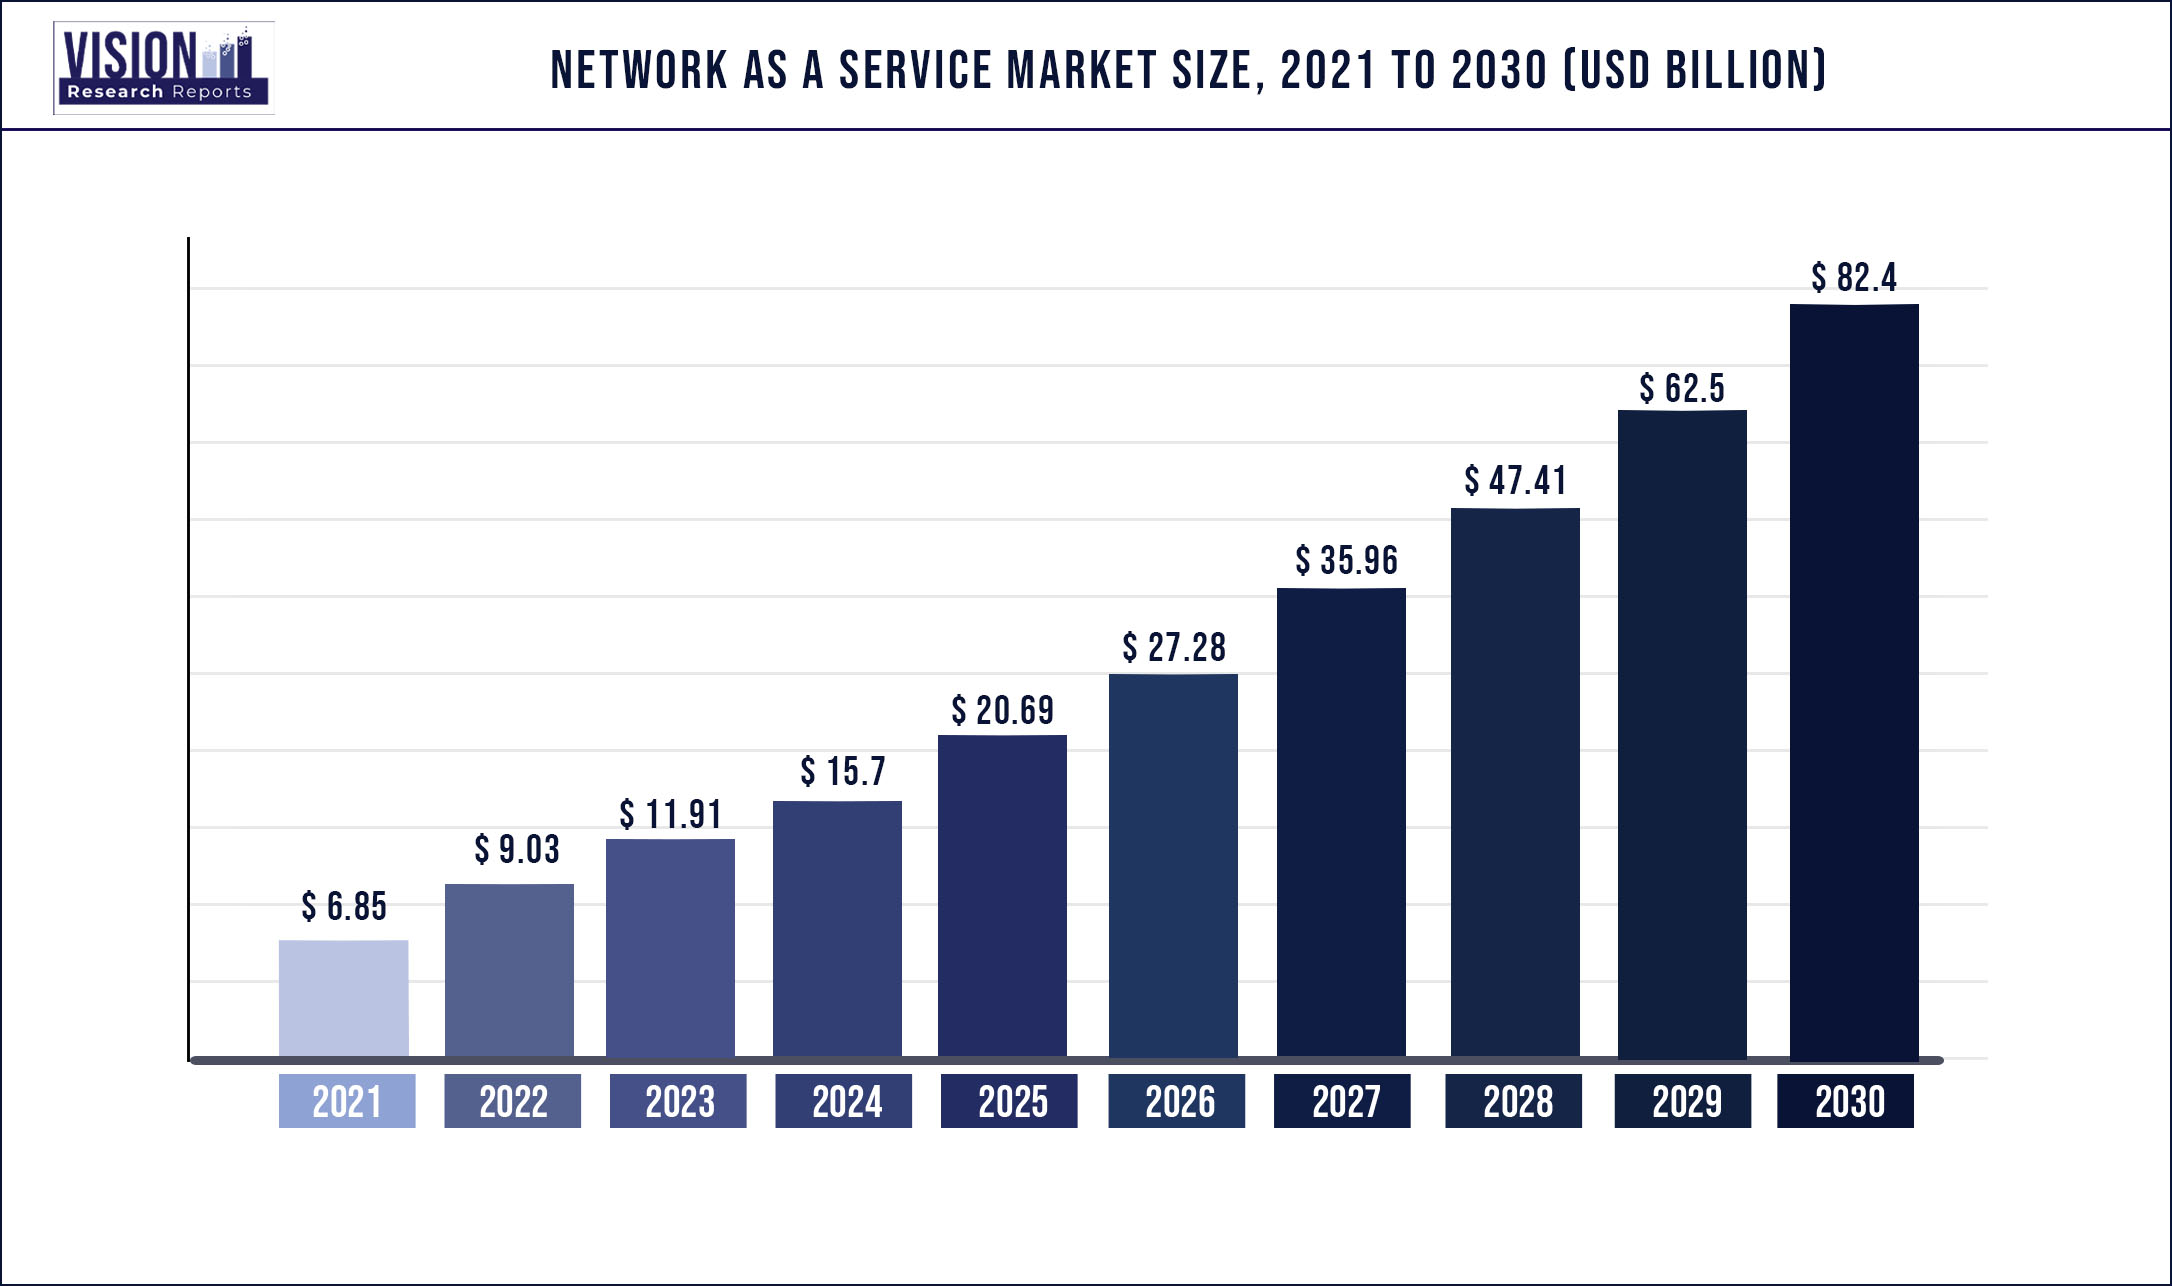 Network As A Service Market Size 2021 to 2030